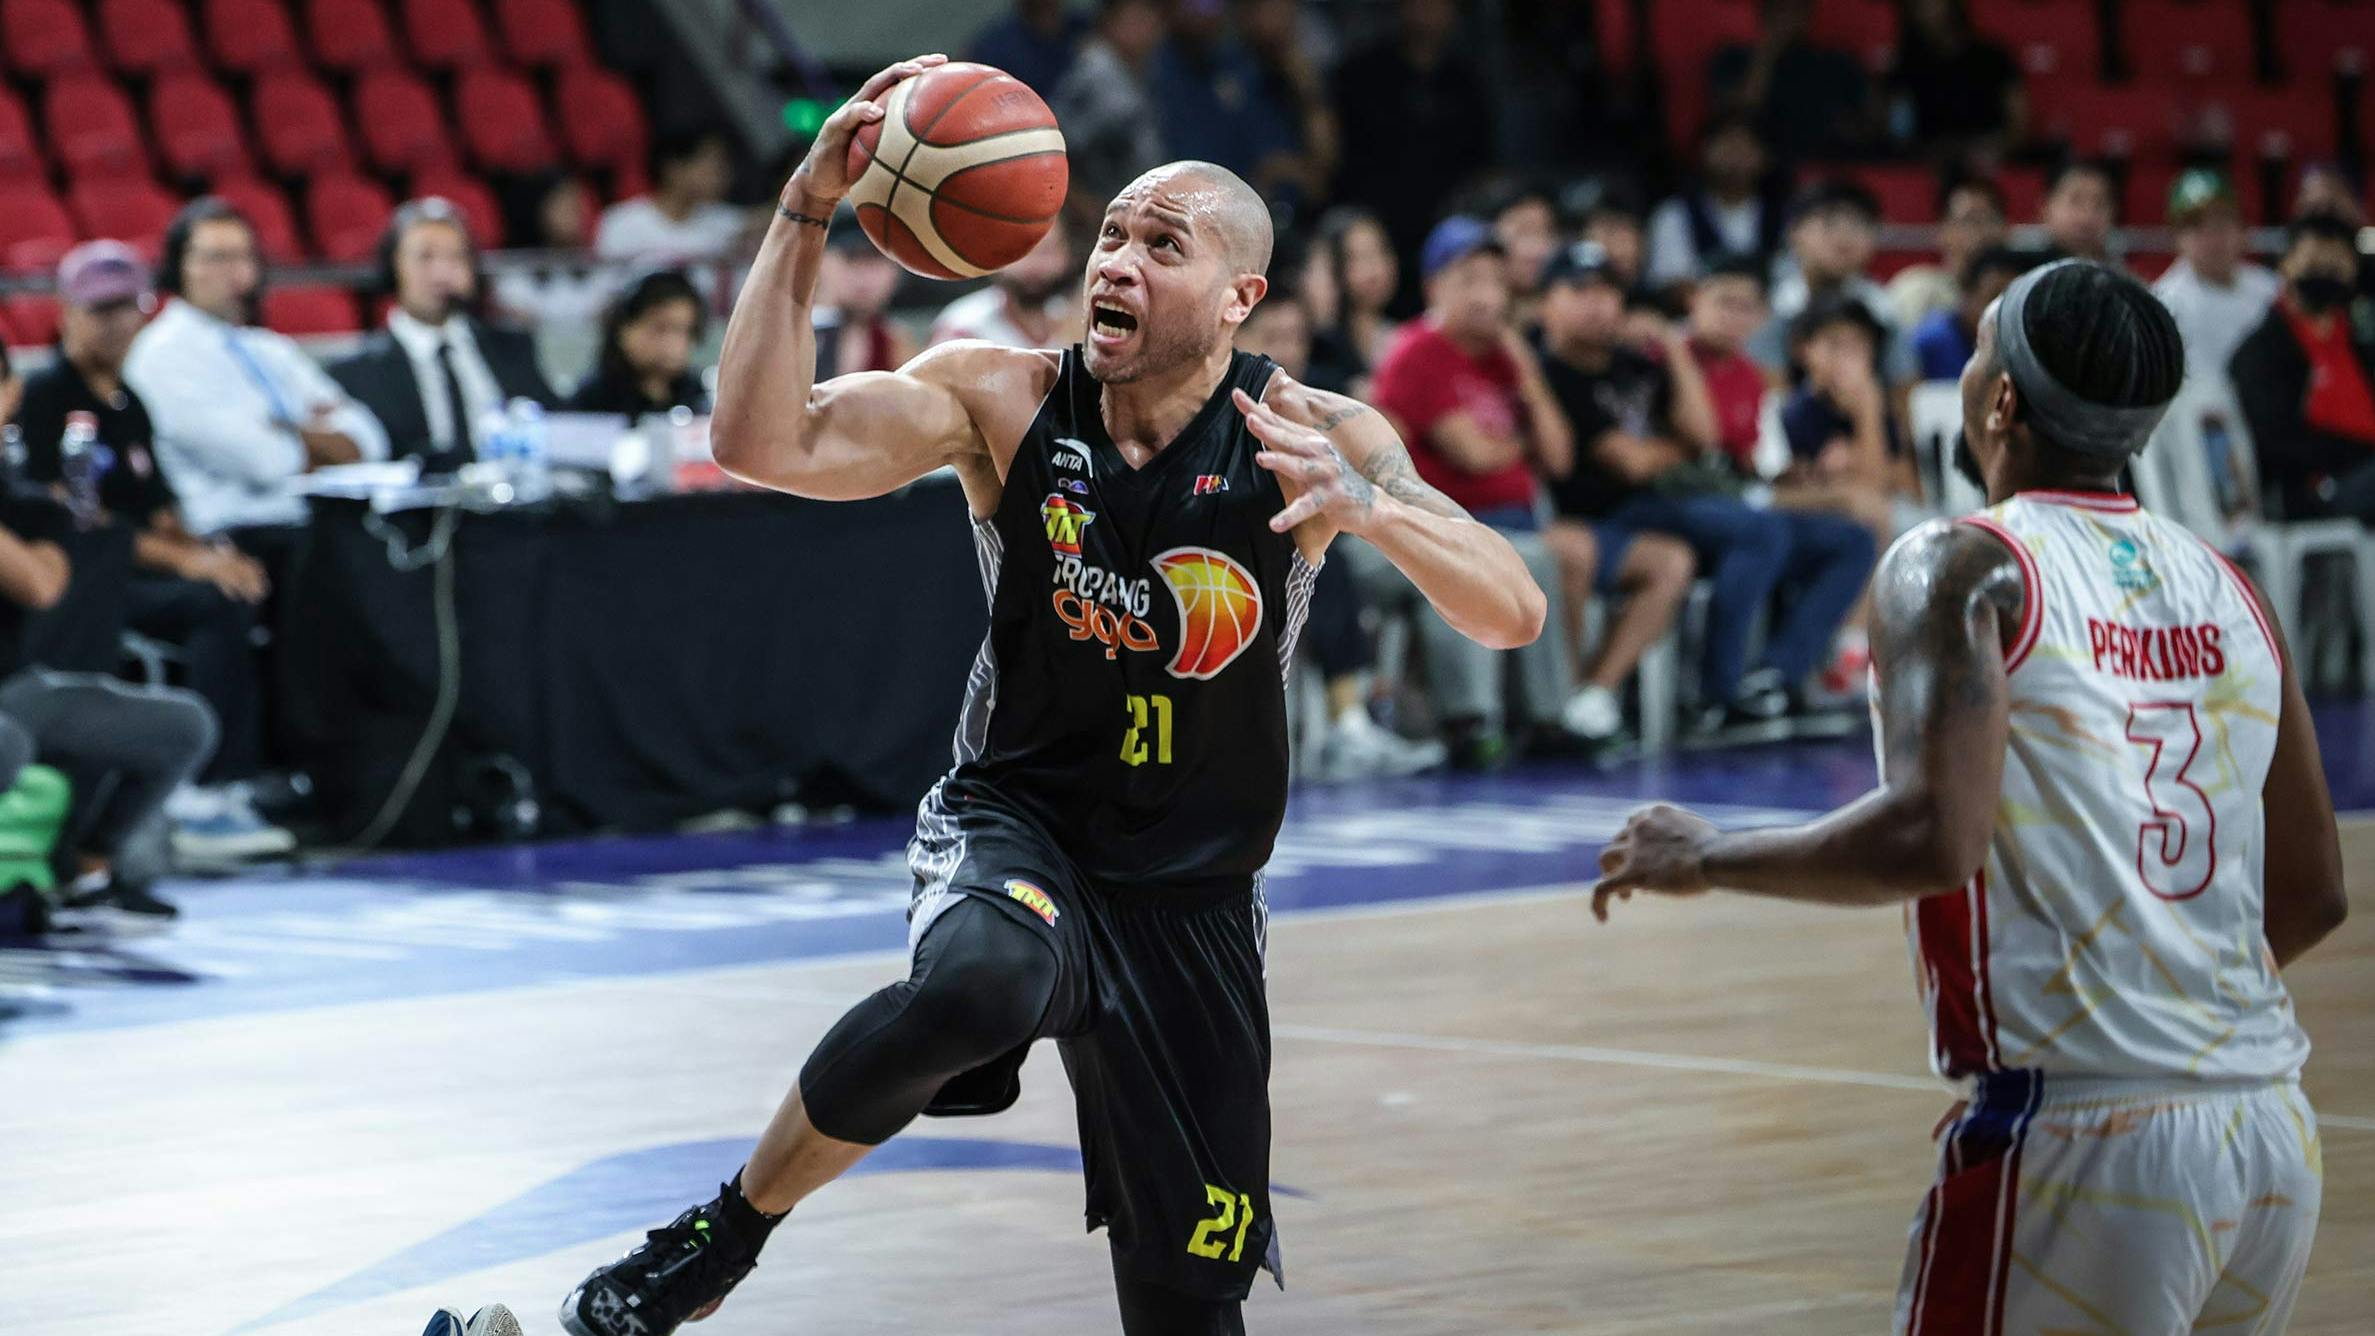 PBA: After shaky start, TNT vet Kelly Williams believes young team can get it together sooner than later